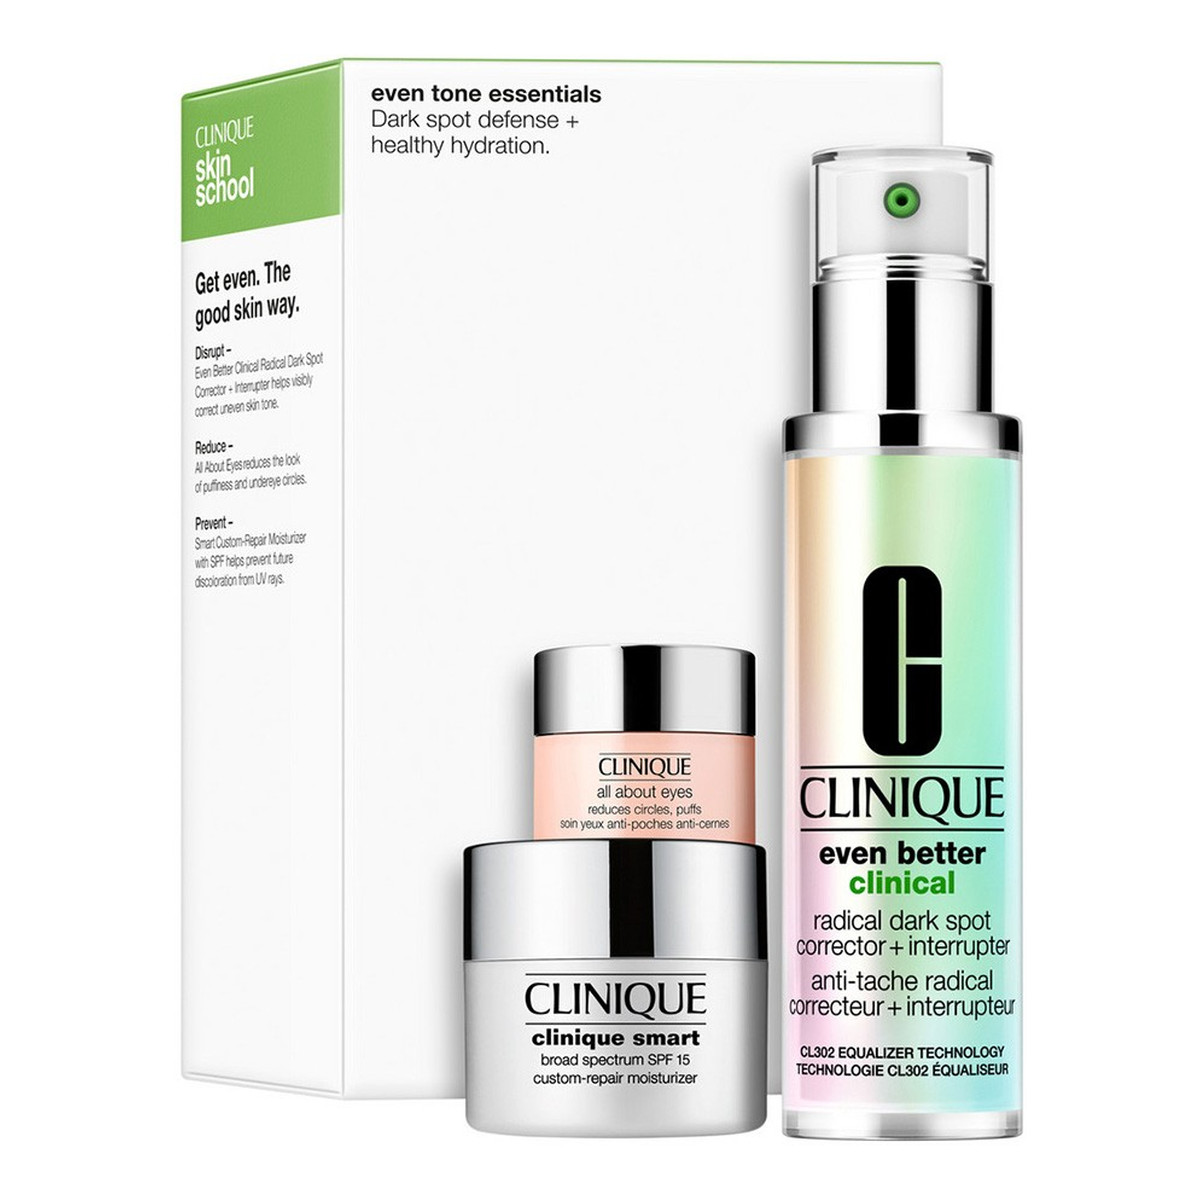 Clinique Even Tone Essentials zestaw All About Eyes 5ml + Clinique Smart Broad Spectrum SPF15 15ml + Even Better Clinical